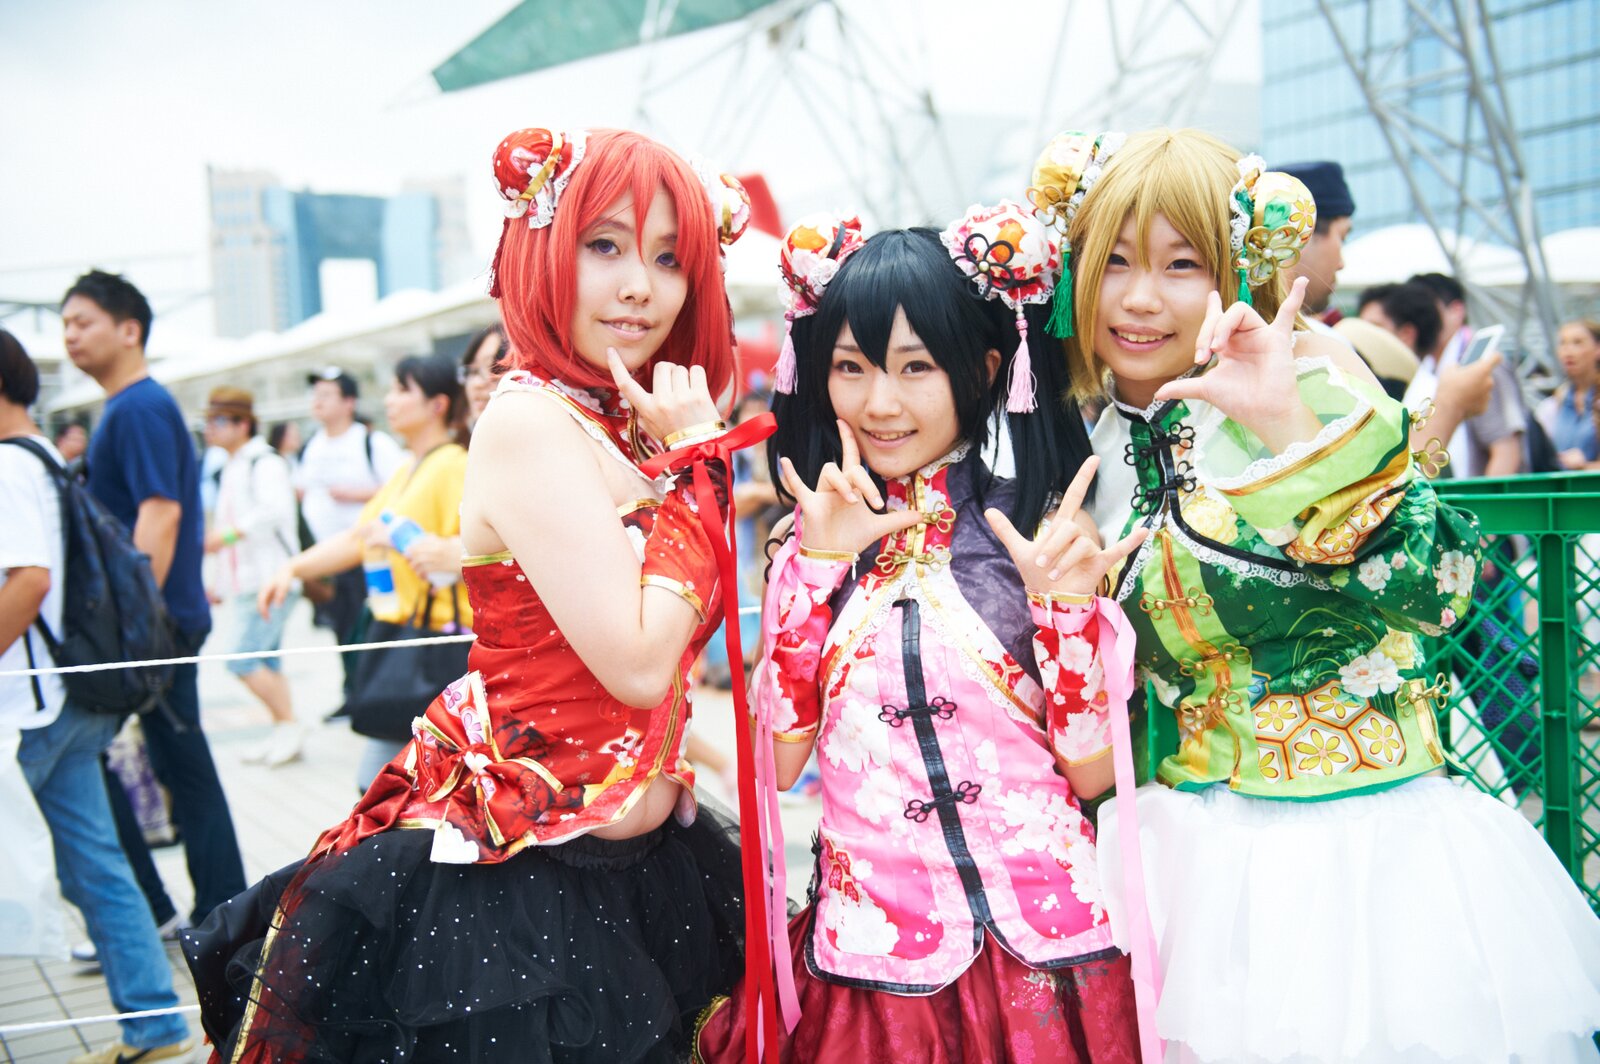 This Summer’s Comiket Brings in 550,000 in Attendance Over 3 Days!